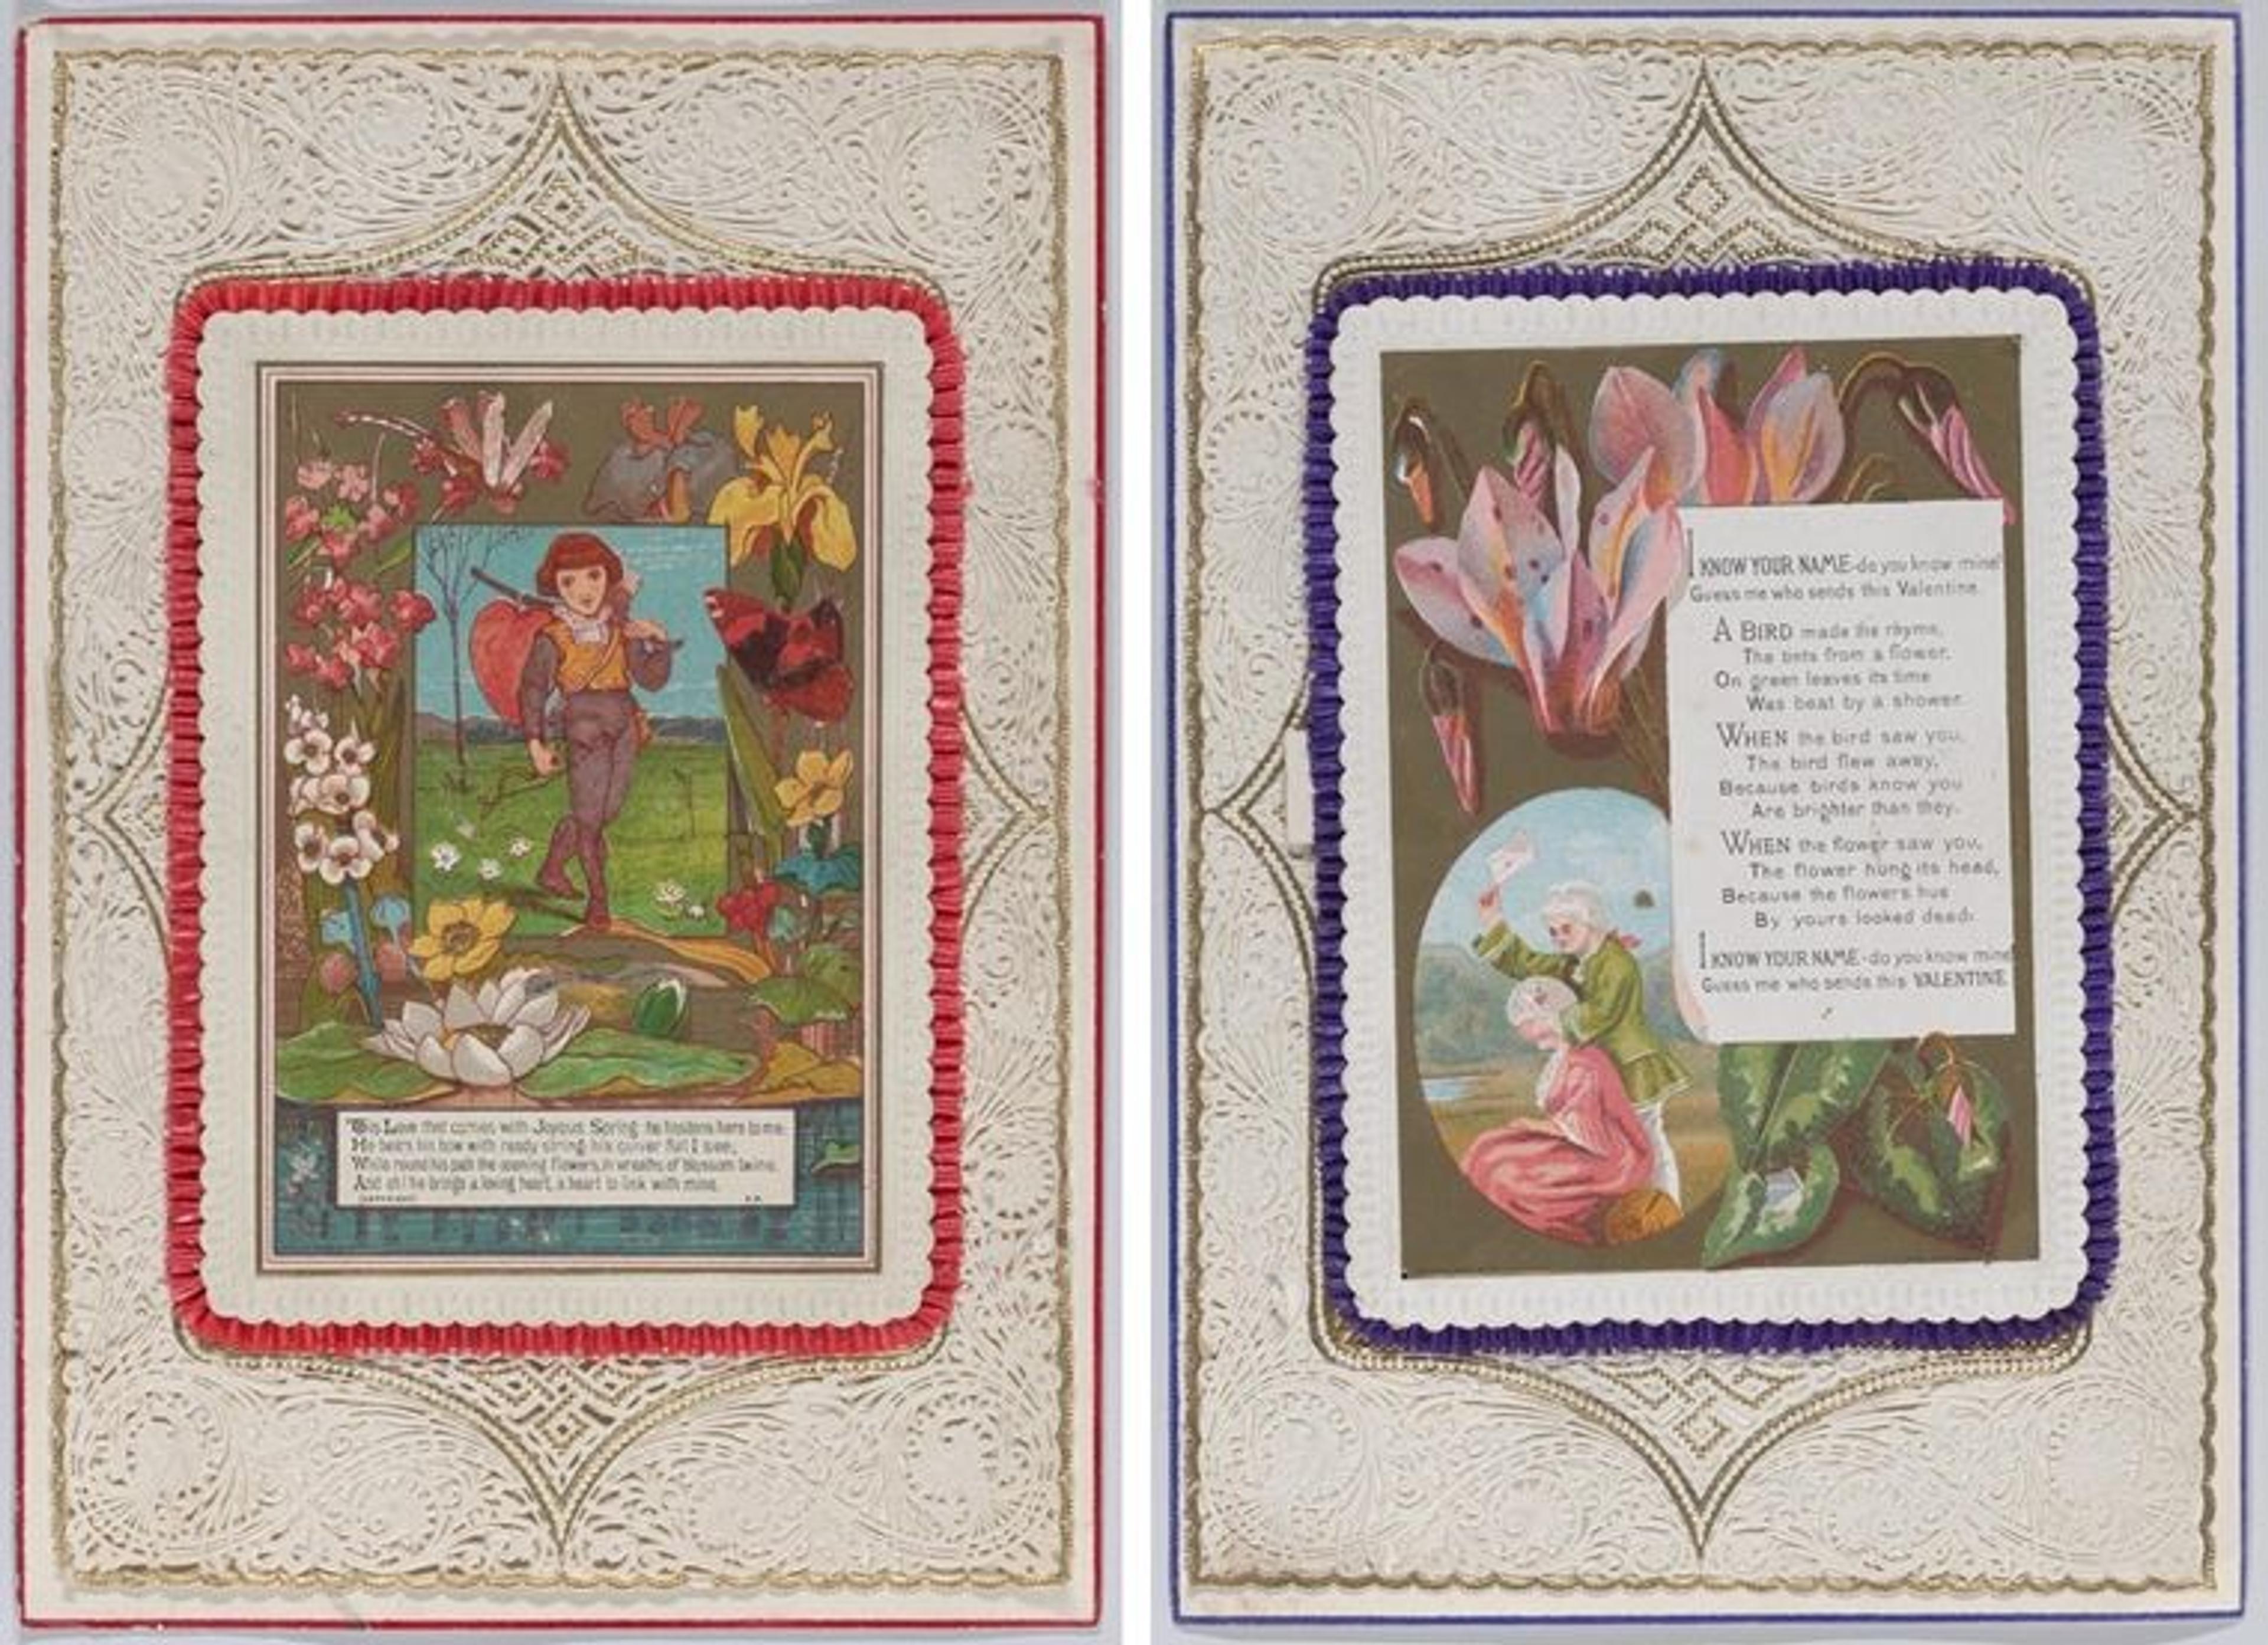 Two Kate Greenaway valentines depicting flowers, young lovers, animals, and poetry